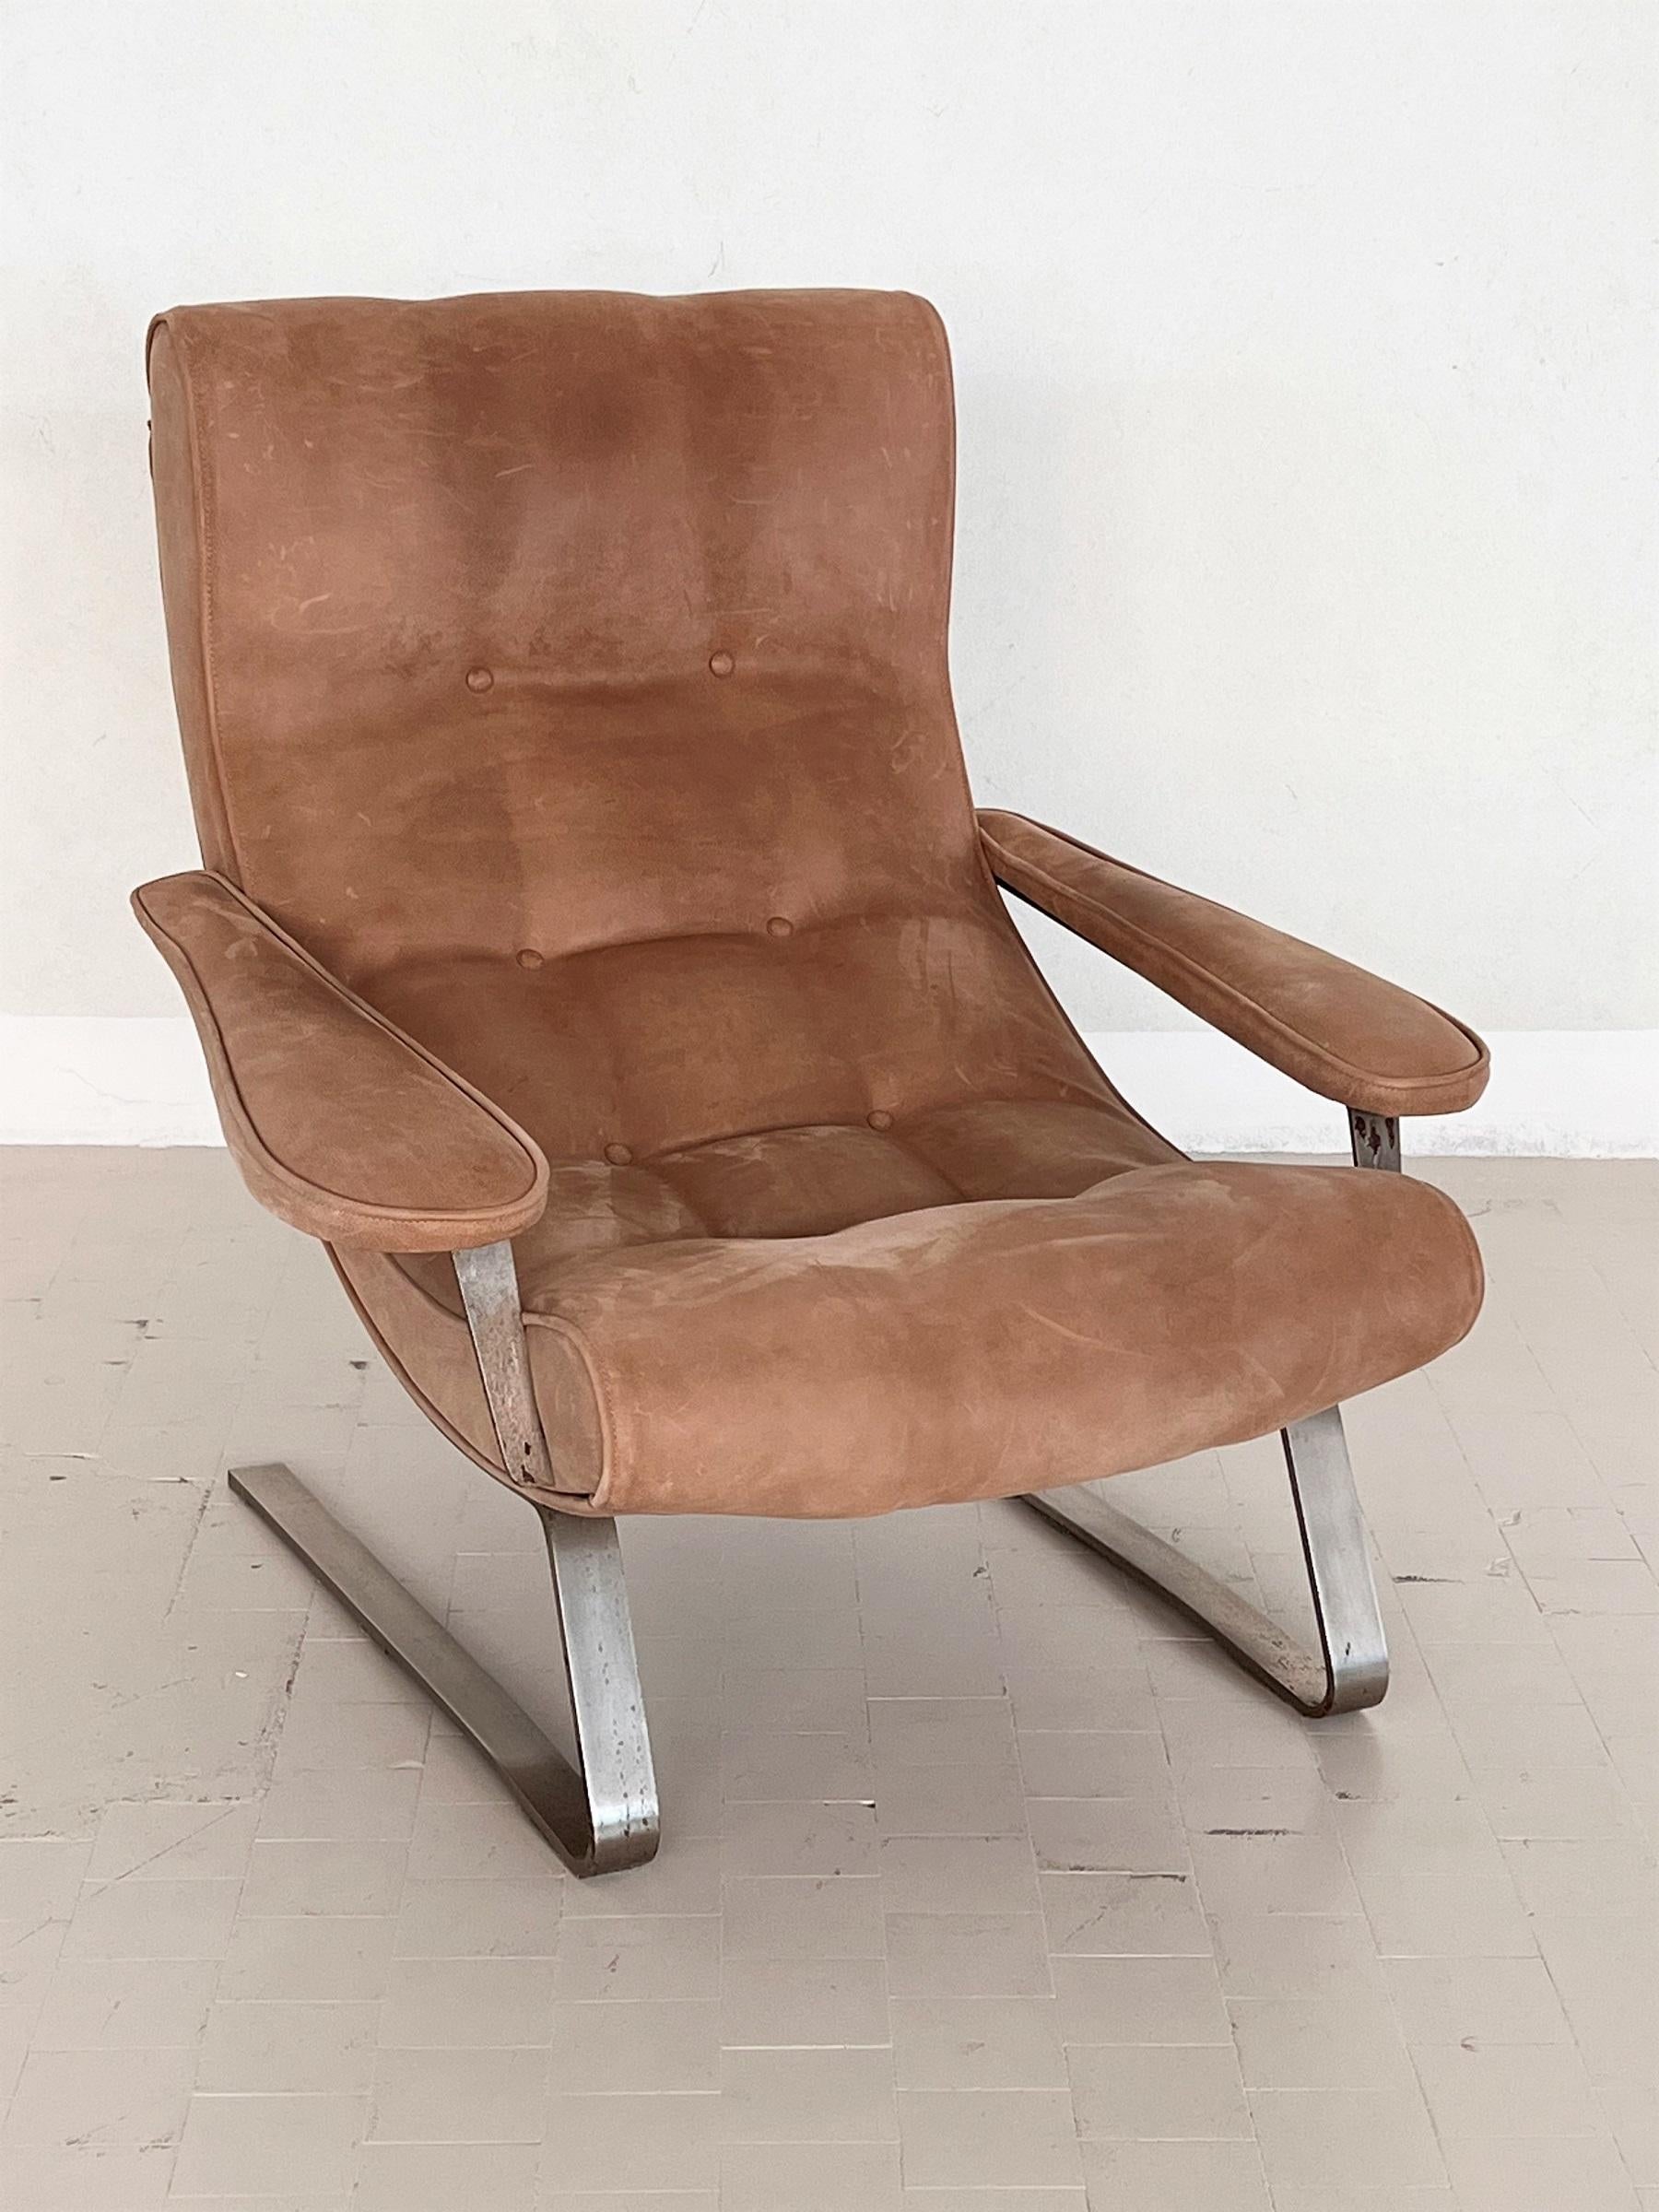 Midcentury Lounge Chair in Suede by Guido Bonzani for Tecnosalotto, 1970s For Sale 1